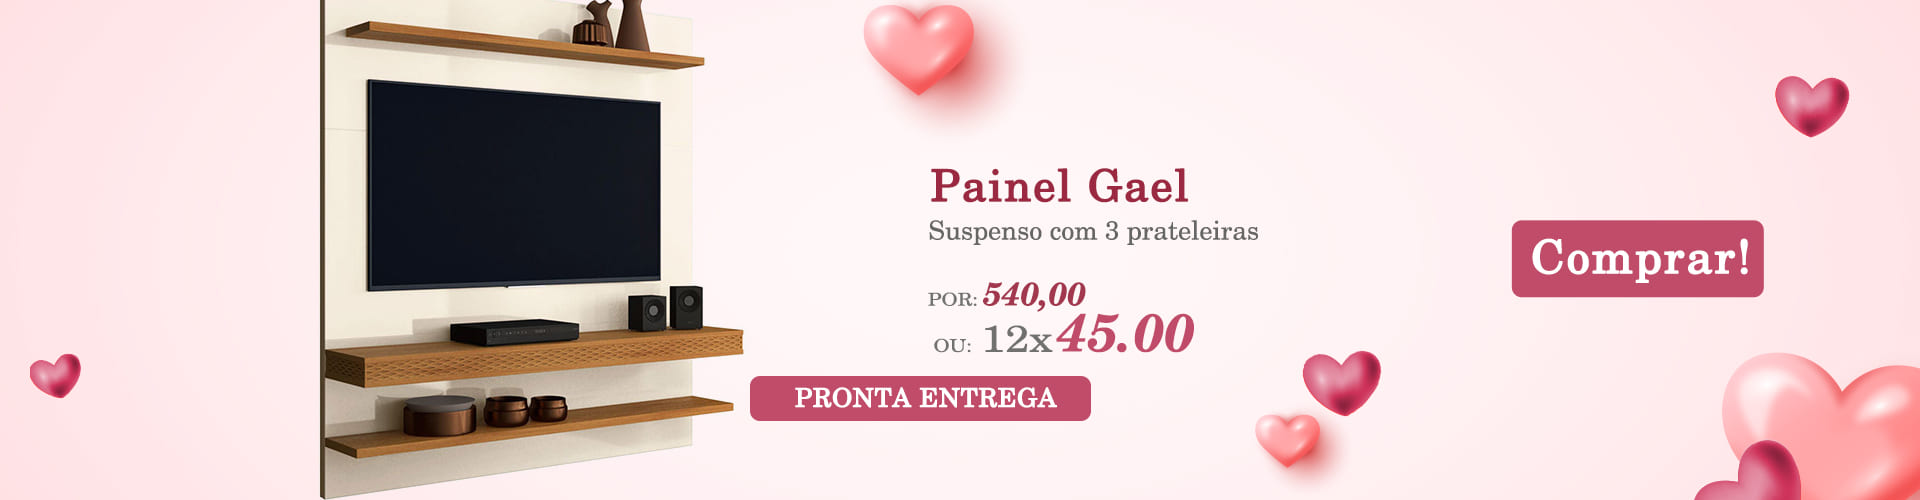 Painel Gael